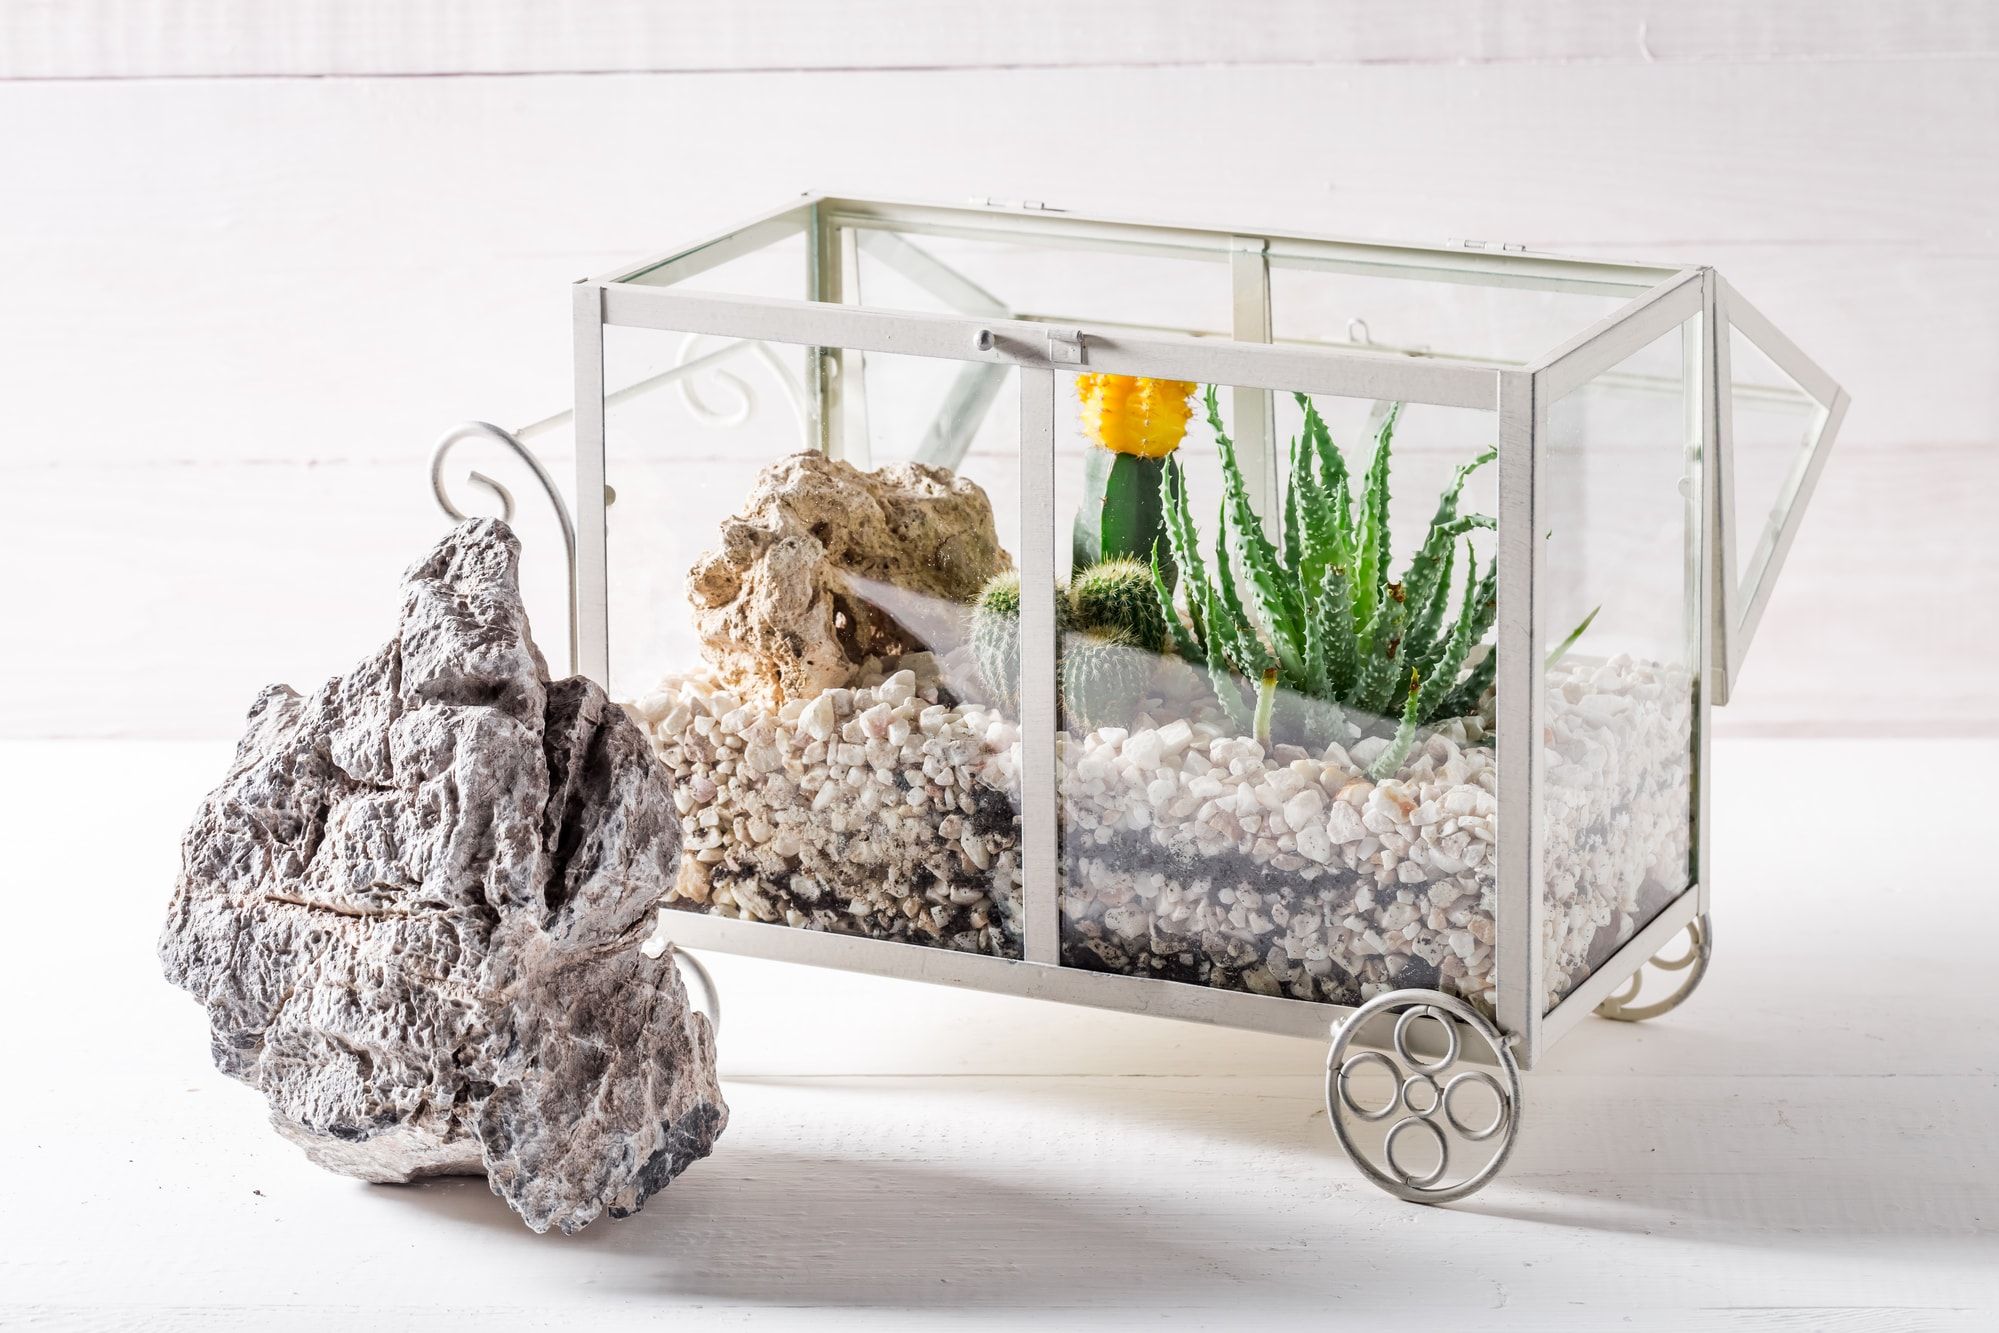 Small terrarium with cactus and piece of desert inside a rectangular transparent glass with wheel